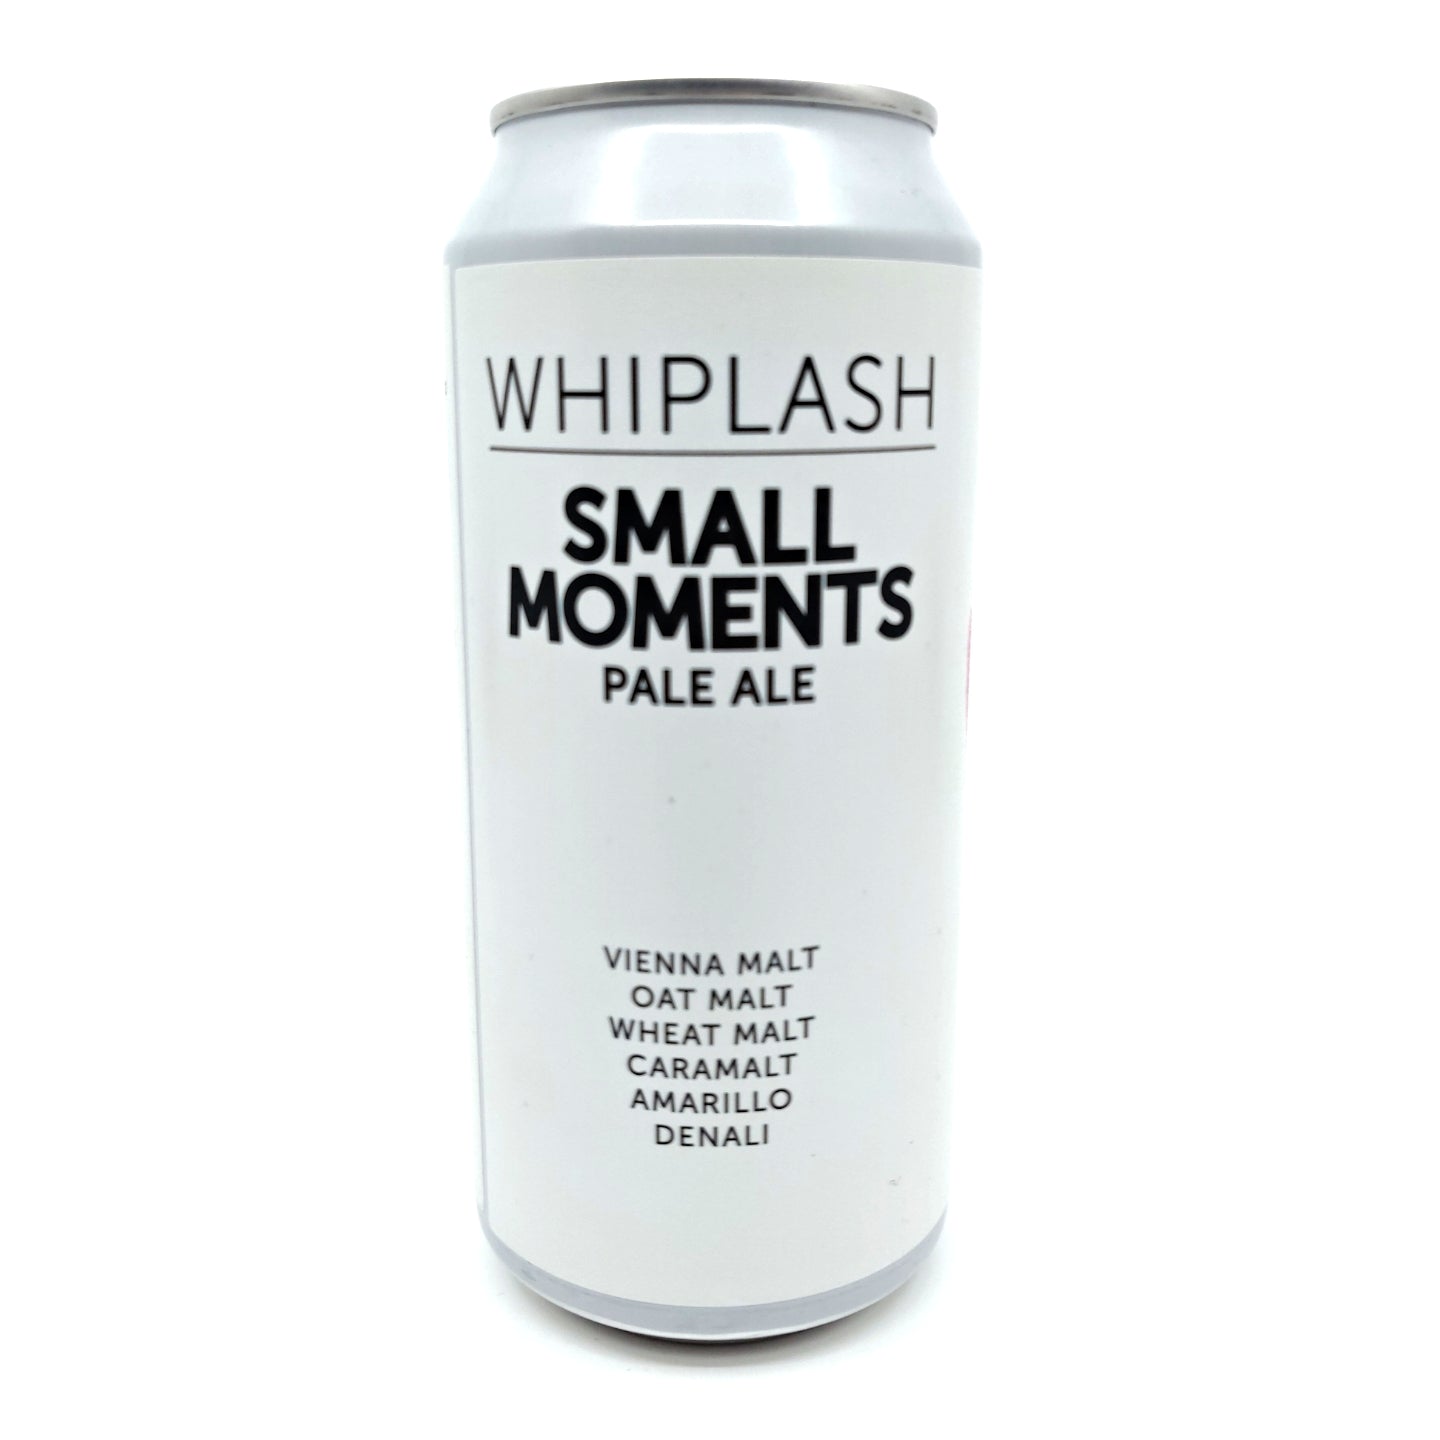 Whiplash Small Moments Session IPA 4.3% (440ml can)-Hop Burns & Black